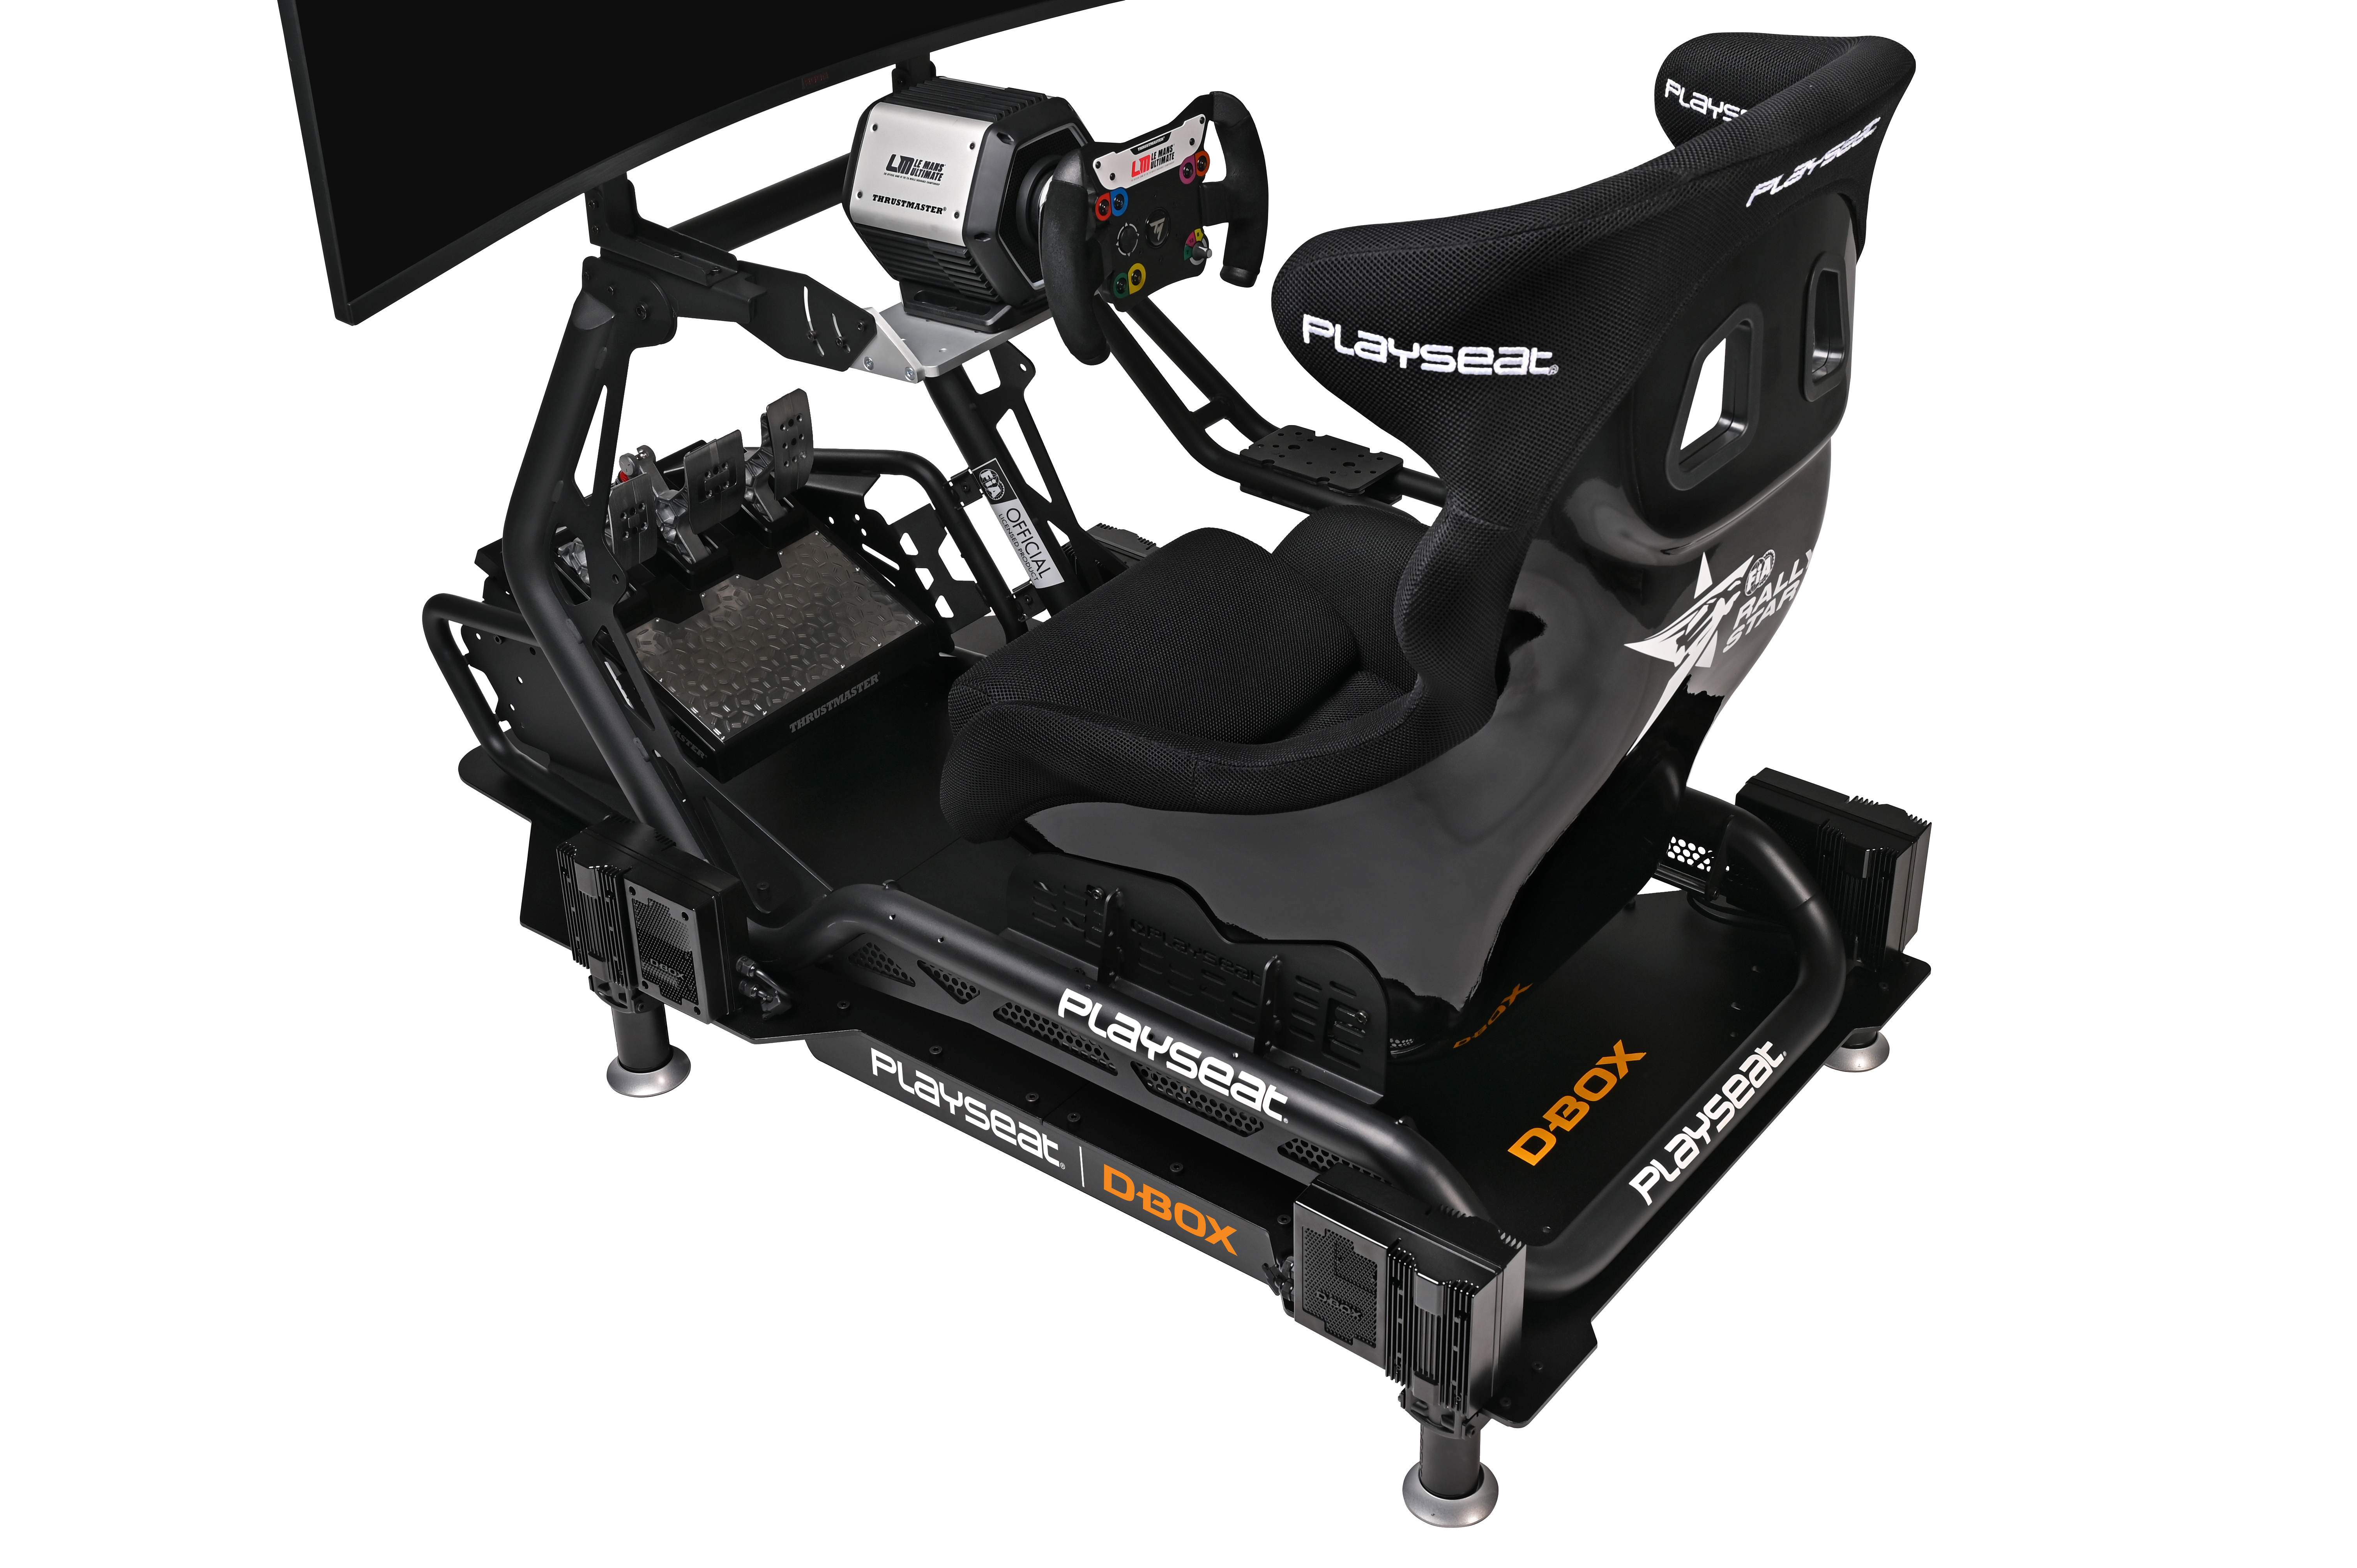 D-BOX partners with Playseat®, a global leader and pioneer, playseat